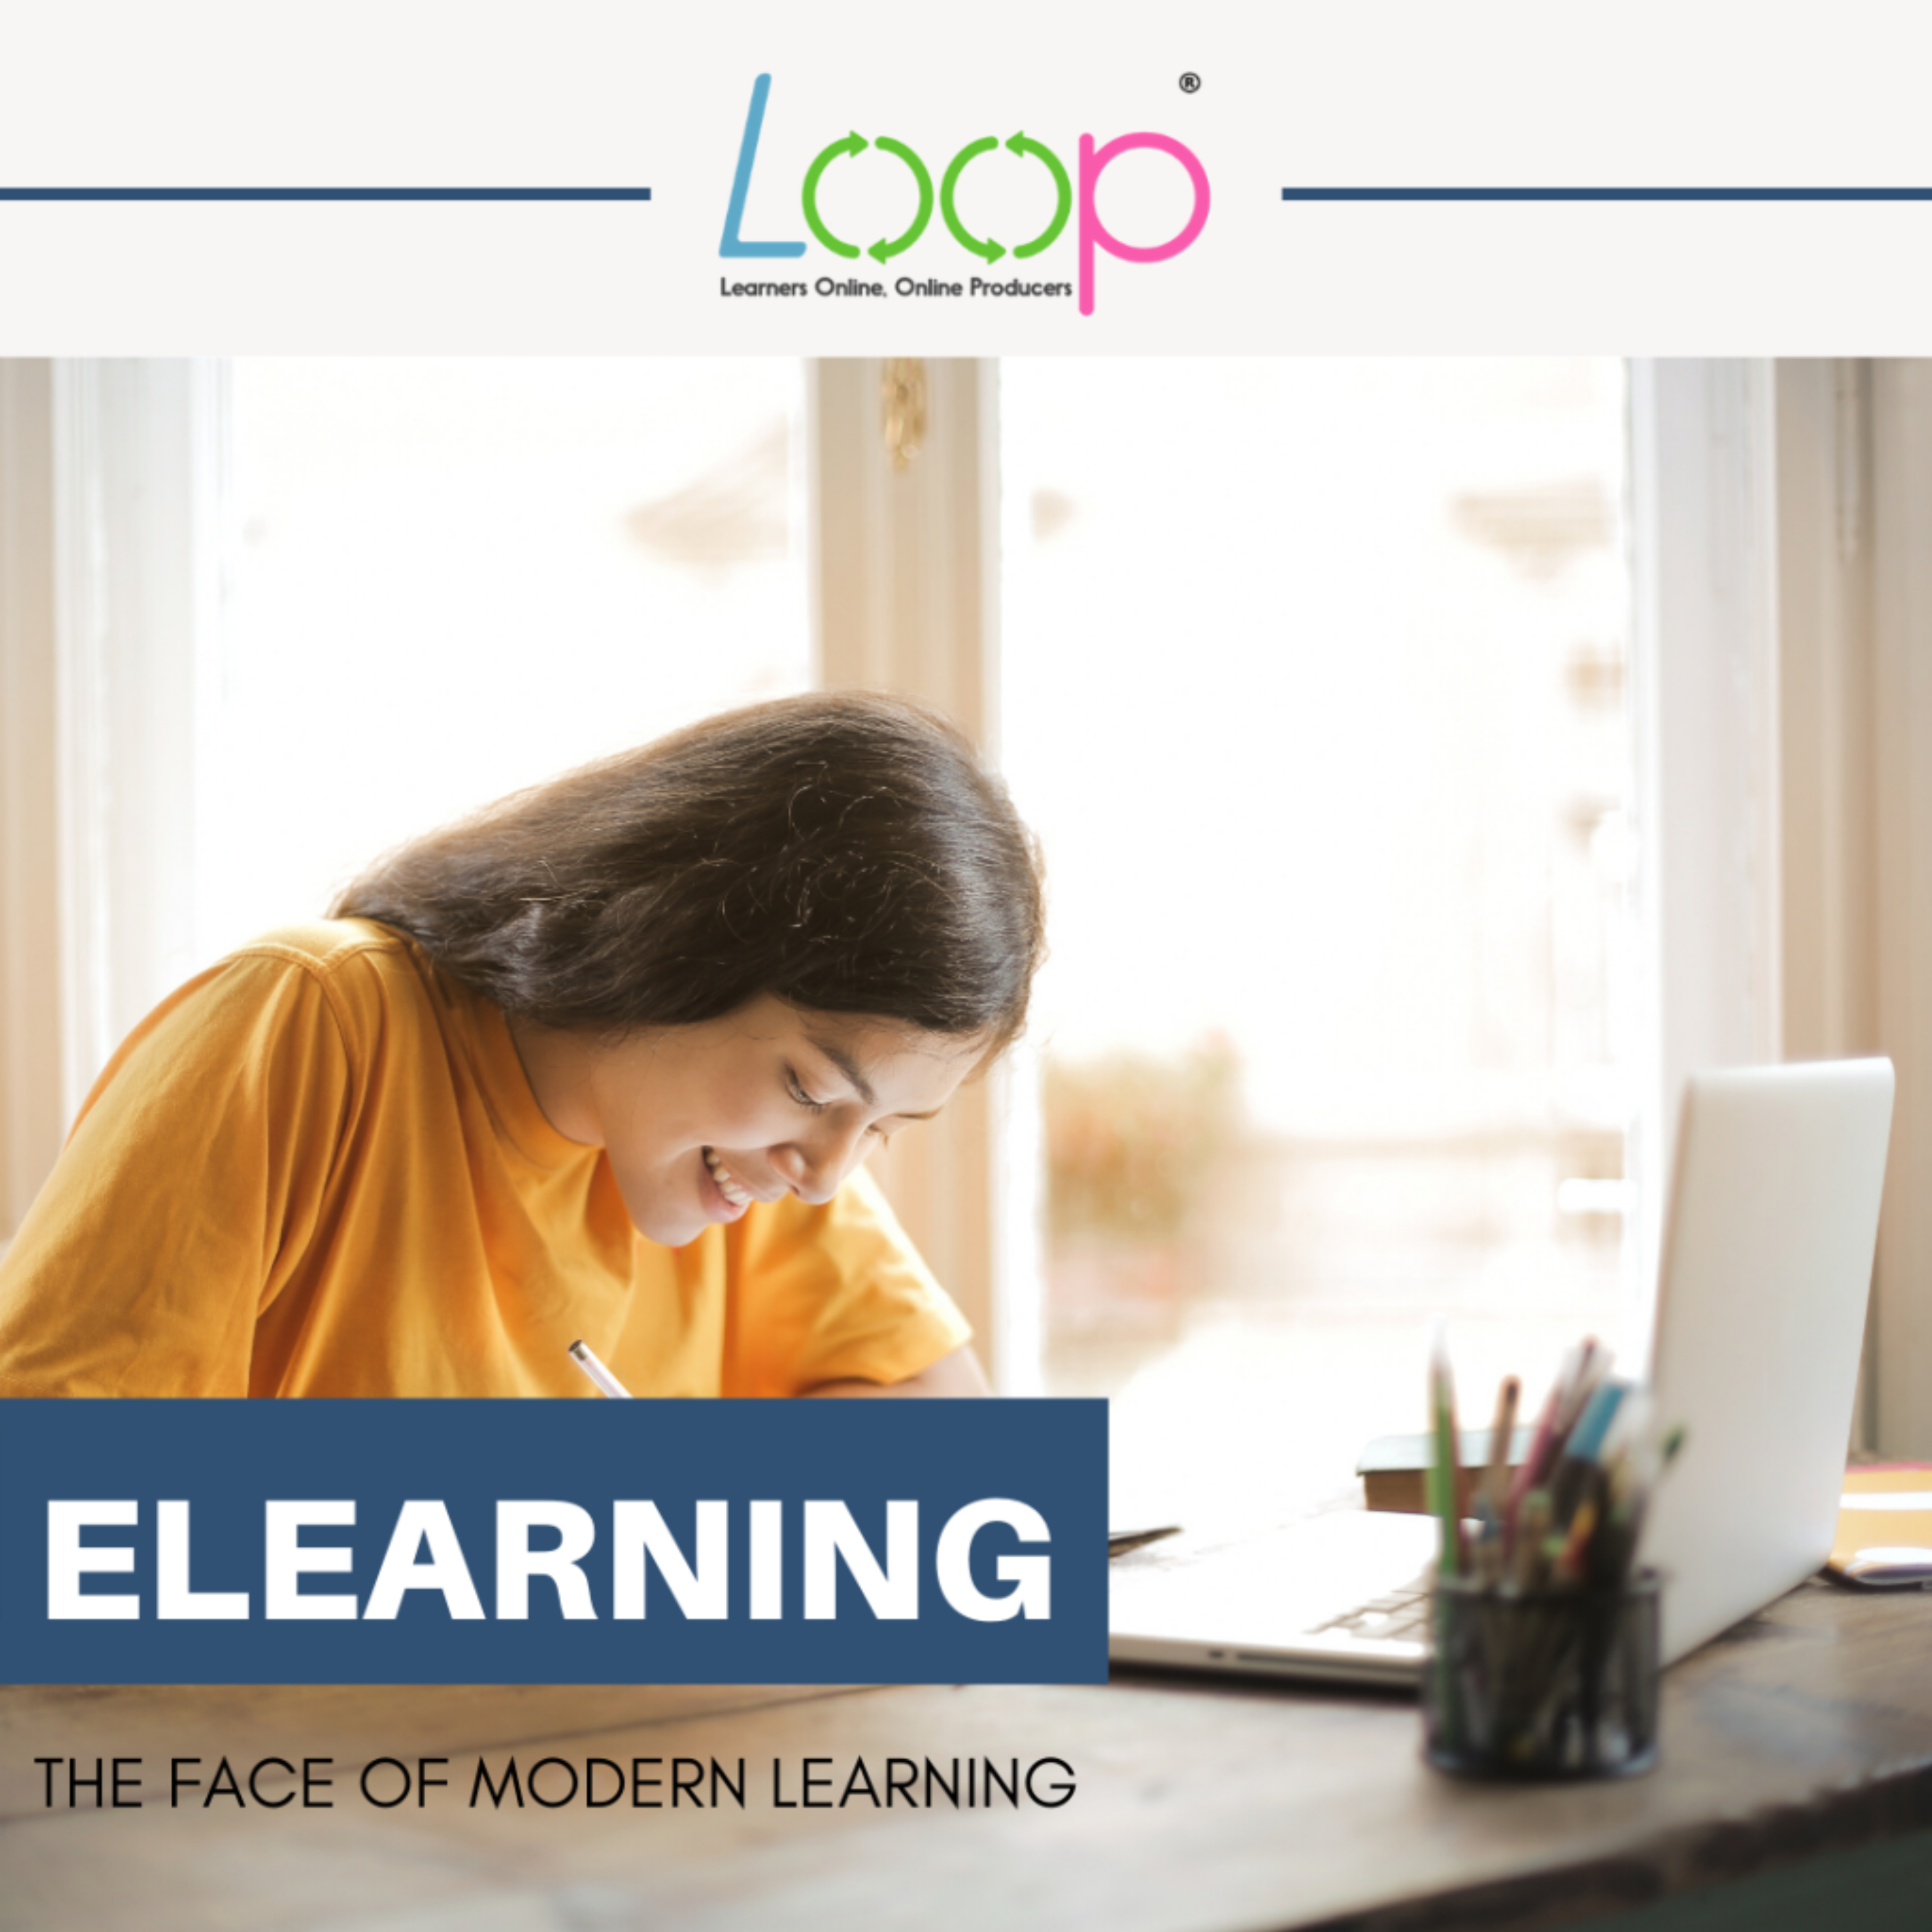 ELEARNING IS THE FACE OF ‘MODERN LEARNING’